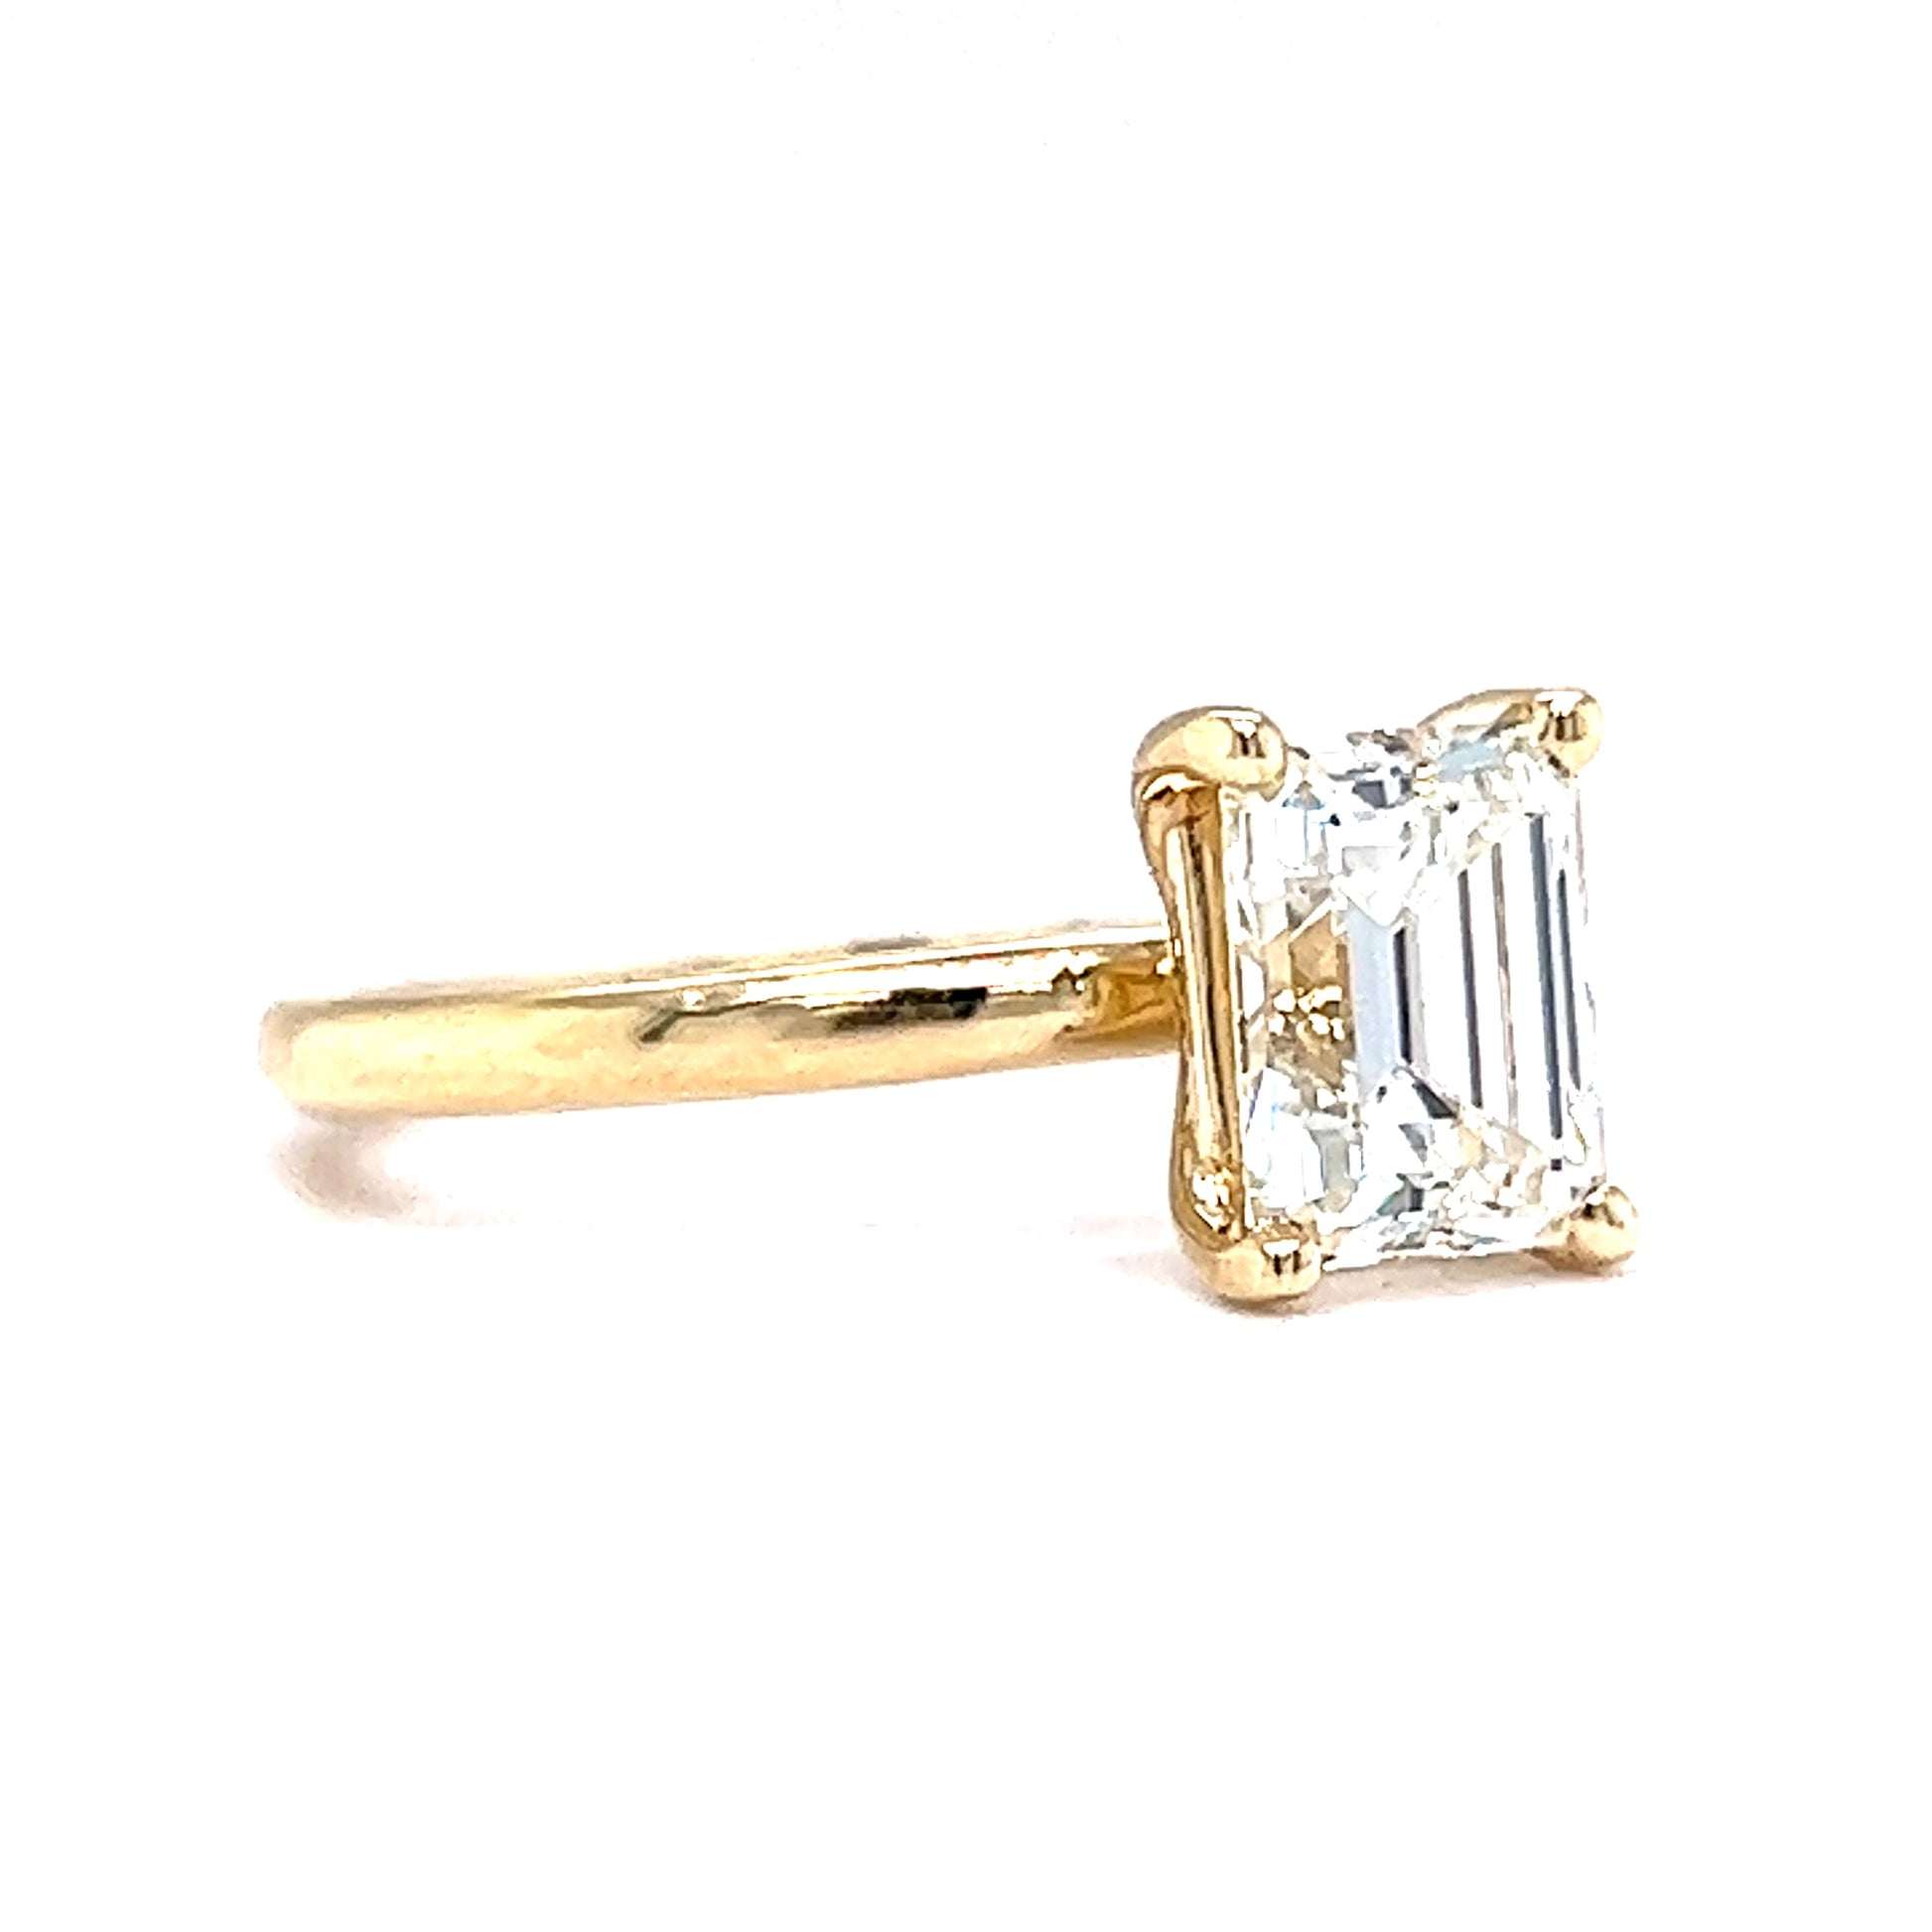 1.61 Emerald Cut Diamond Engagement Ring in 14k Yellow GoldComposition: 14 Karat Yellow Gold Ring Size: 7.0 Total Diamond Weight: 1.61ct Total Gram Weight: 3.05 g Inscription: 14k
      